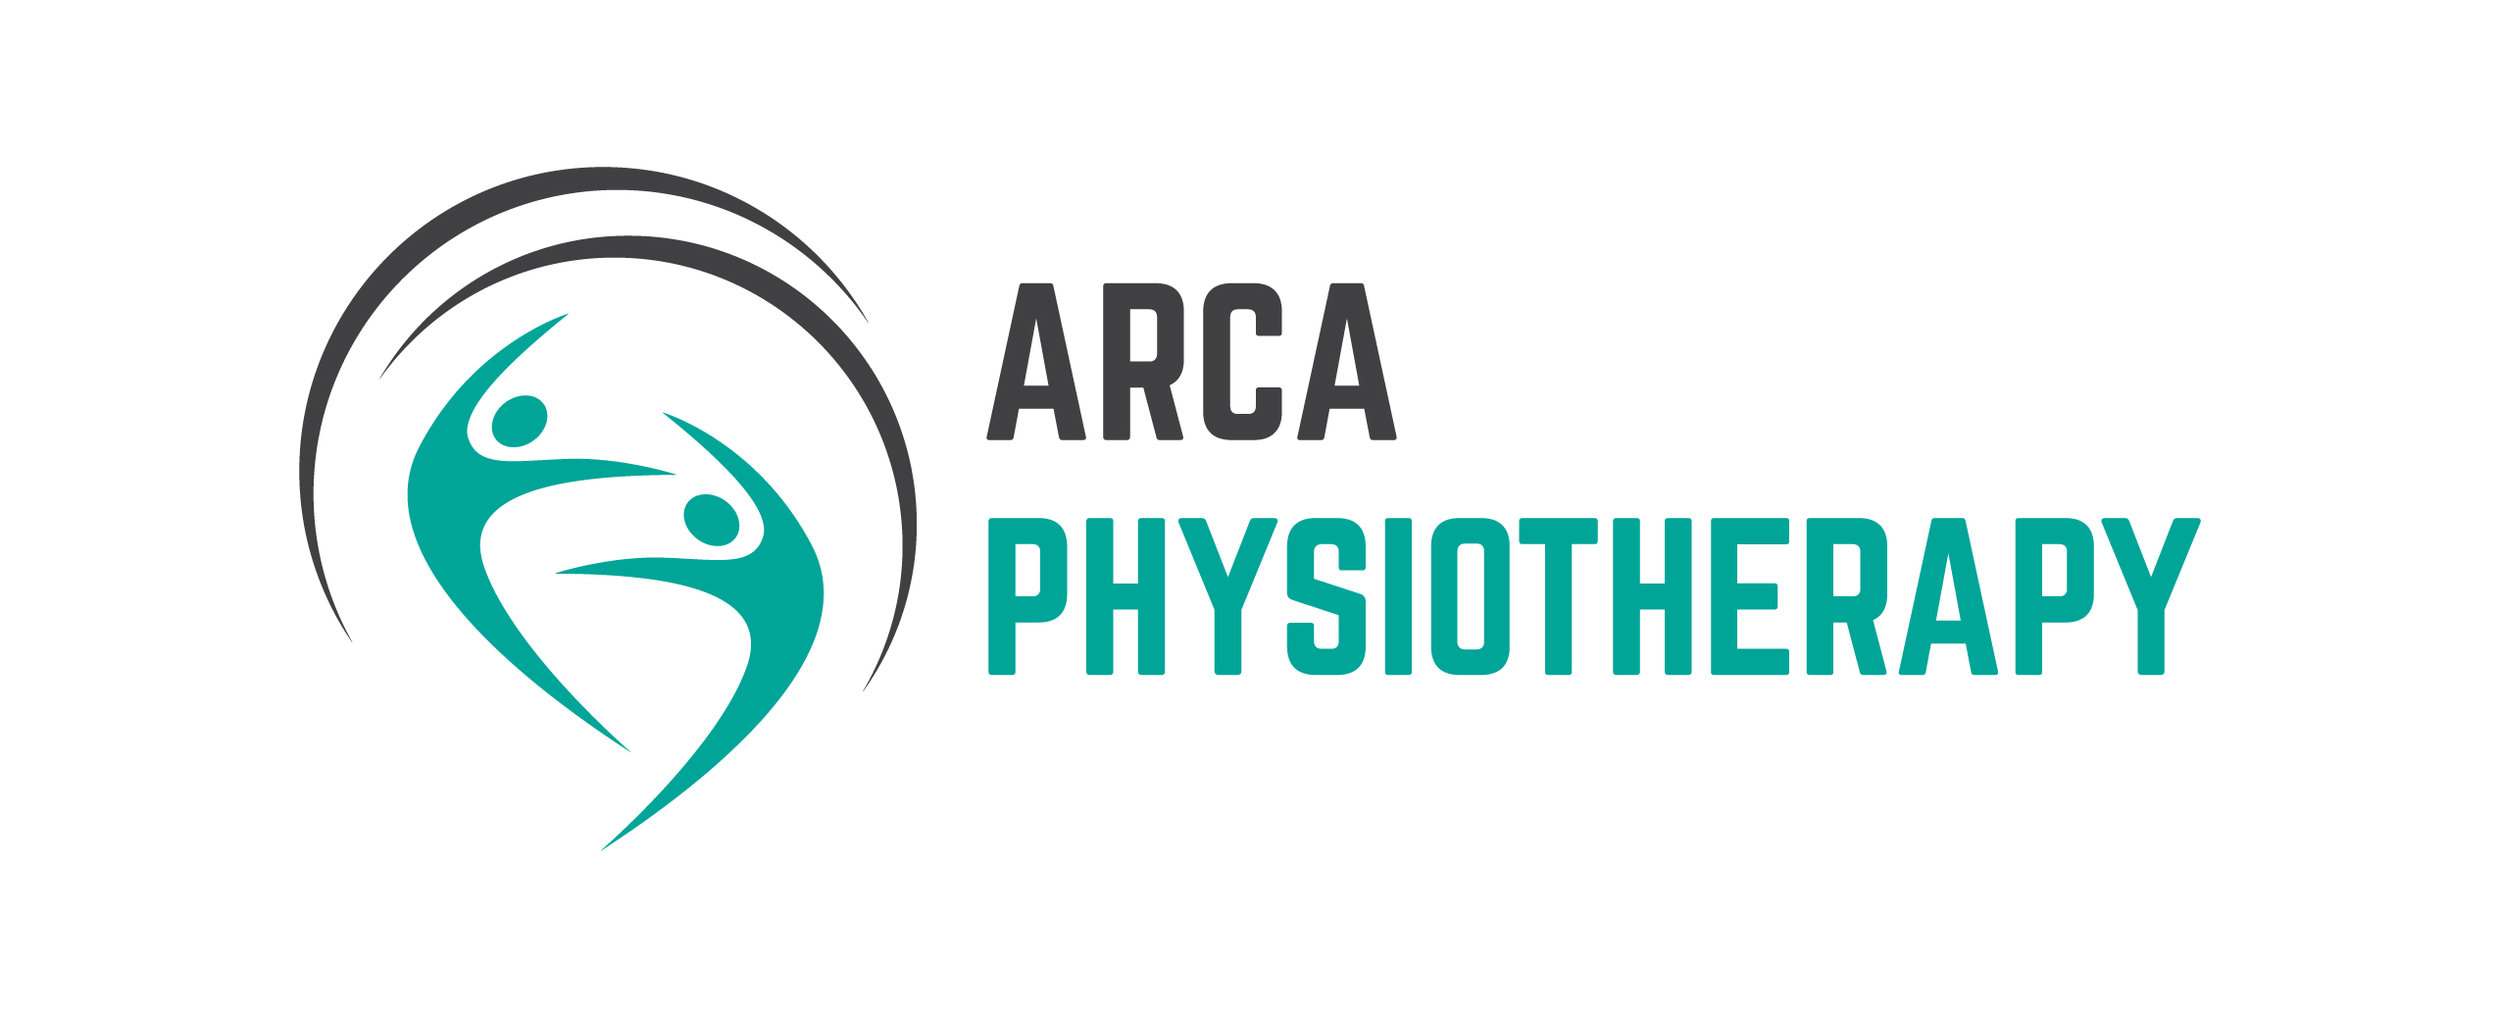 Arca Physiotherapy